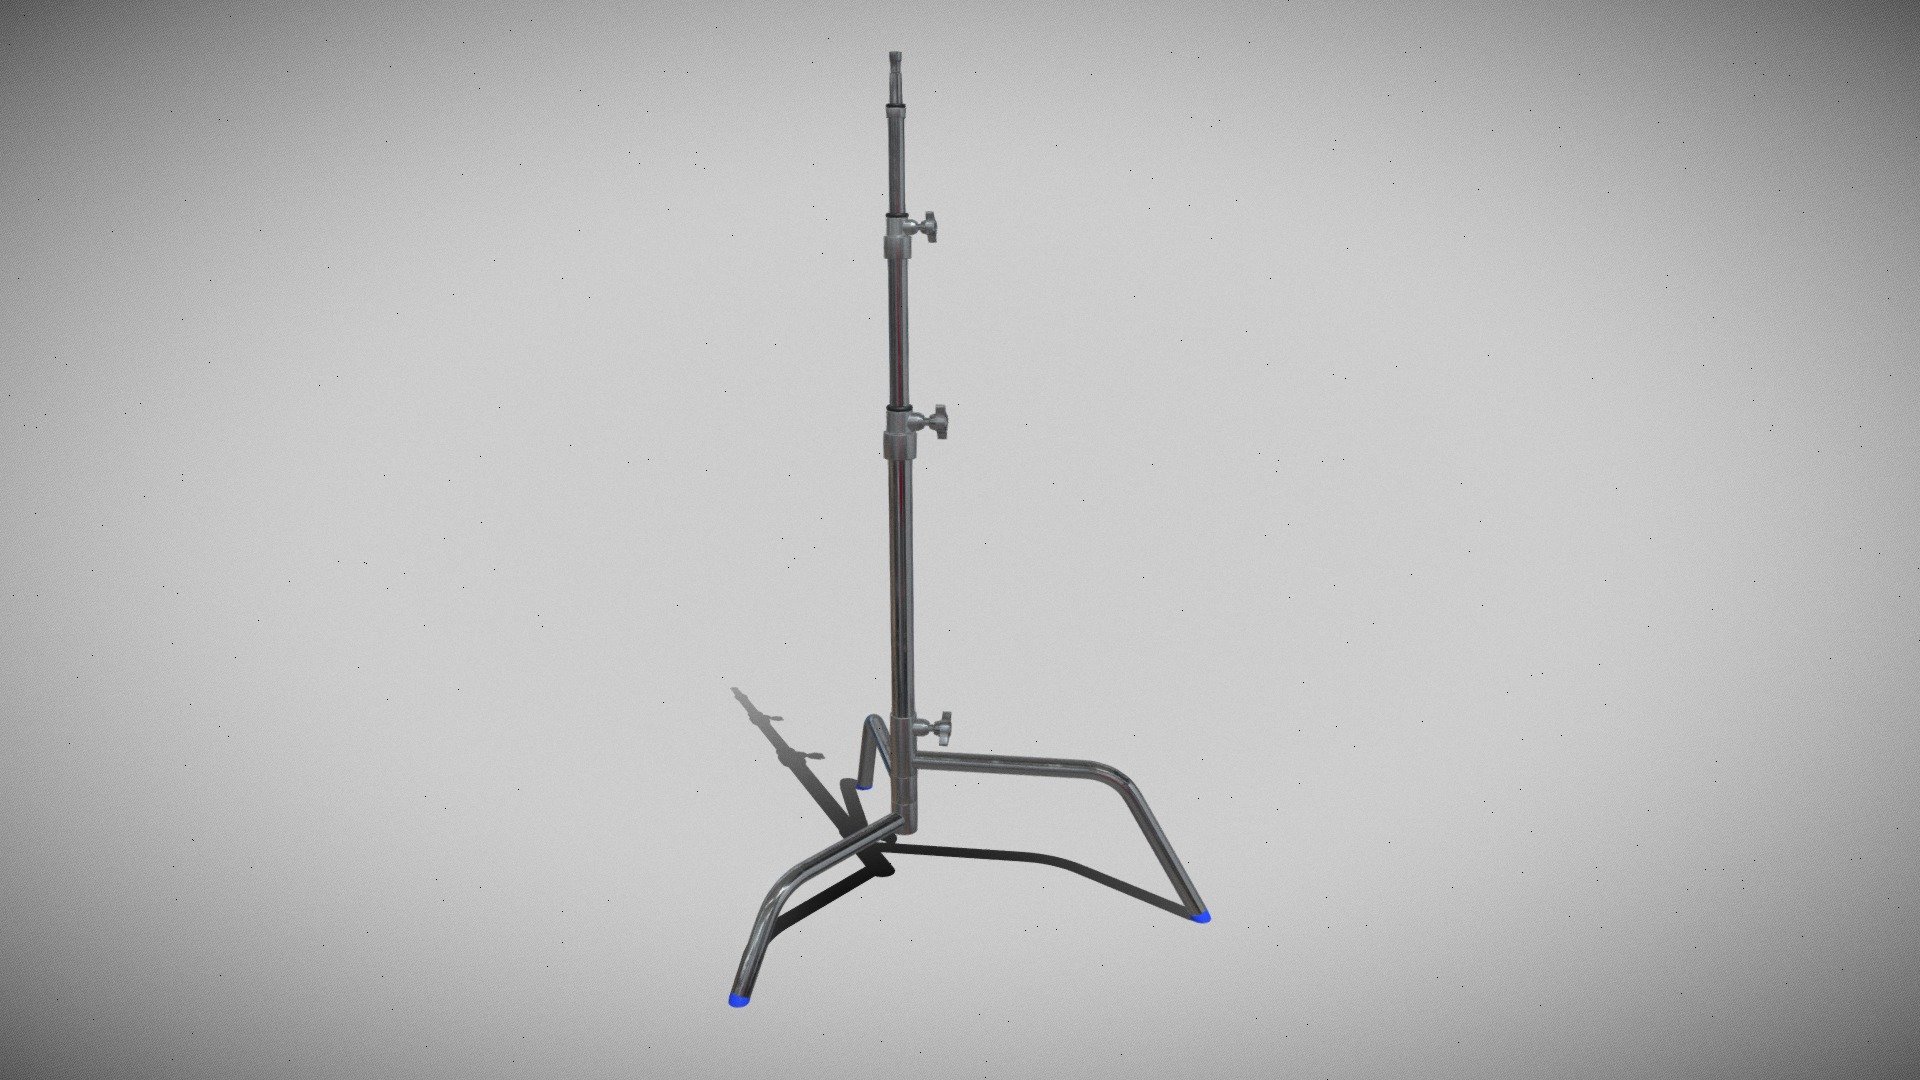 3D model of a C-Stand, a versatile and essential tool used in photography, filmmaking, and video production. The C-Stand features a sturdy base, an adjustable height column, and a boom arm for holding lights, reflectors, and other equipment. Perfect for setting up lighting setups and achieving professional results in your creative projects 3d model